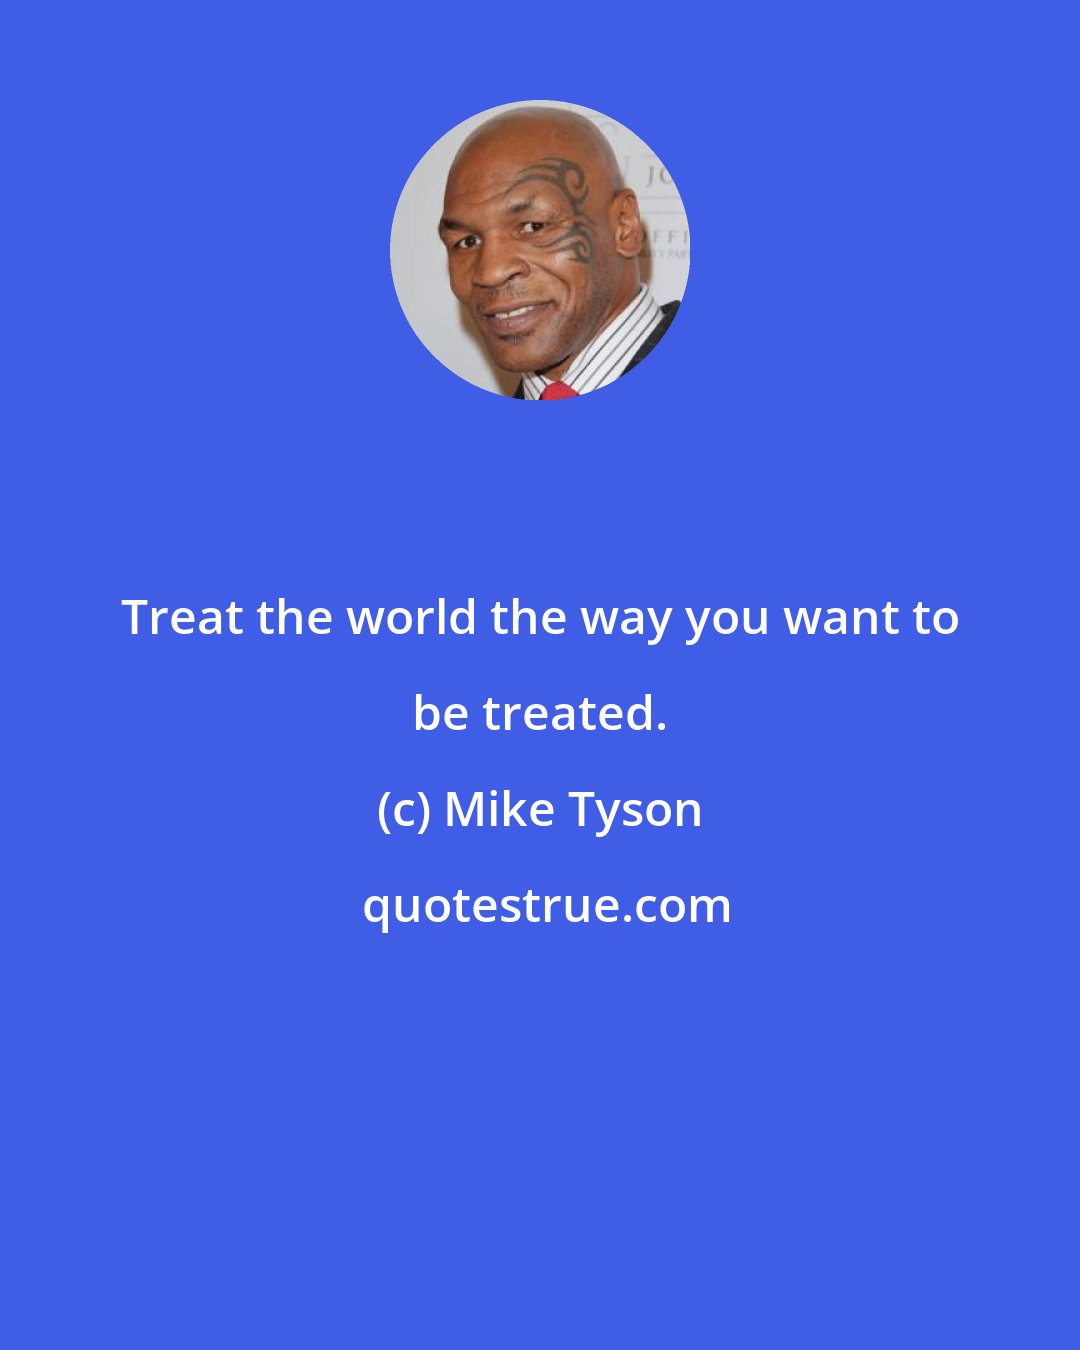 Mike Tyson: Treat the world the way you want to be treated.